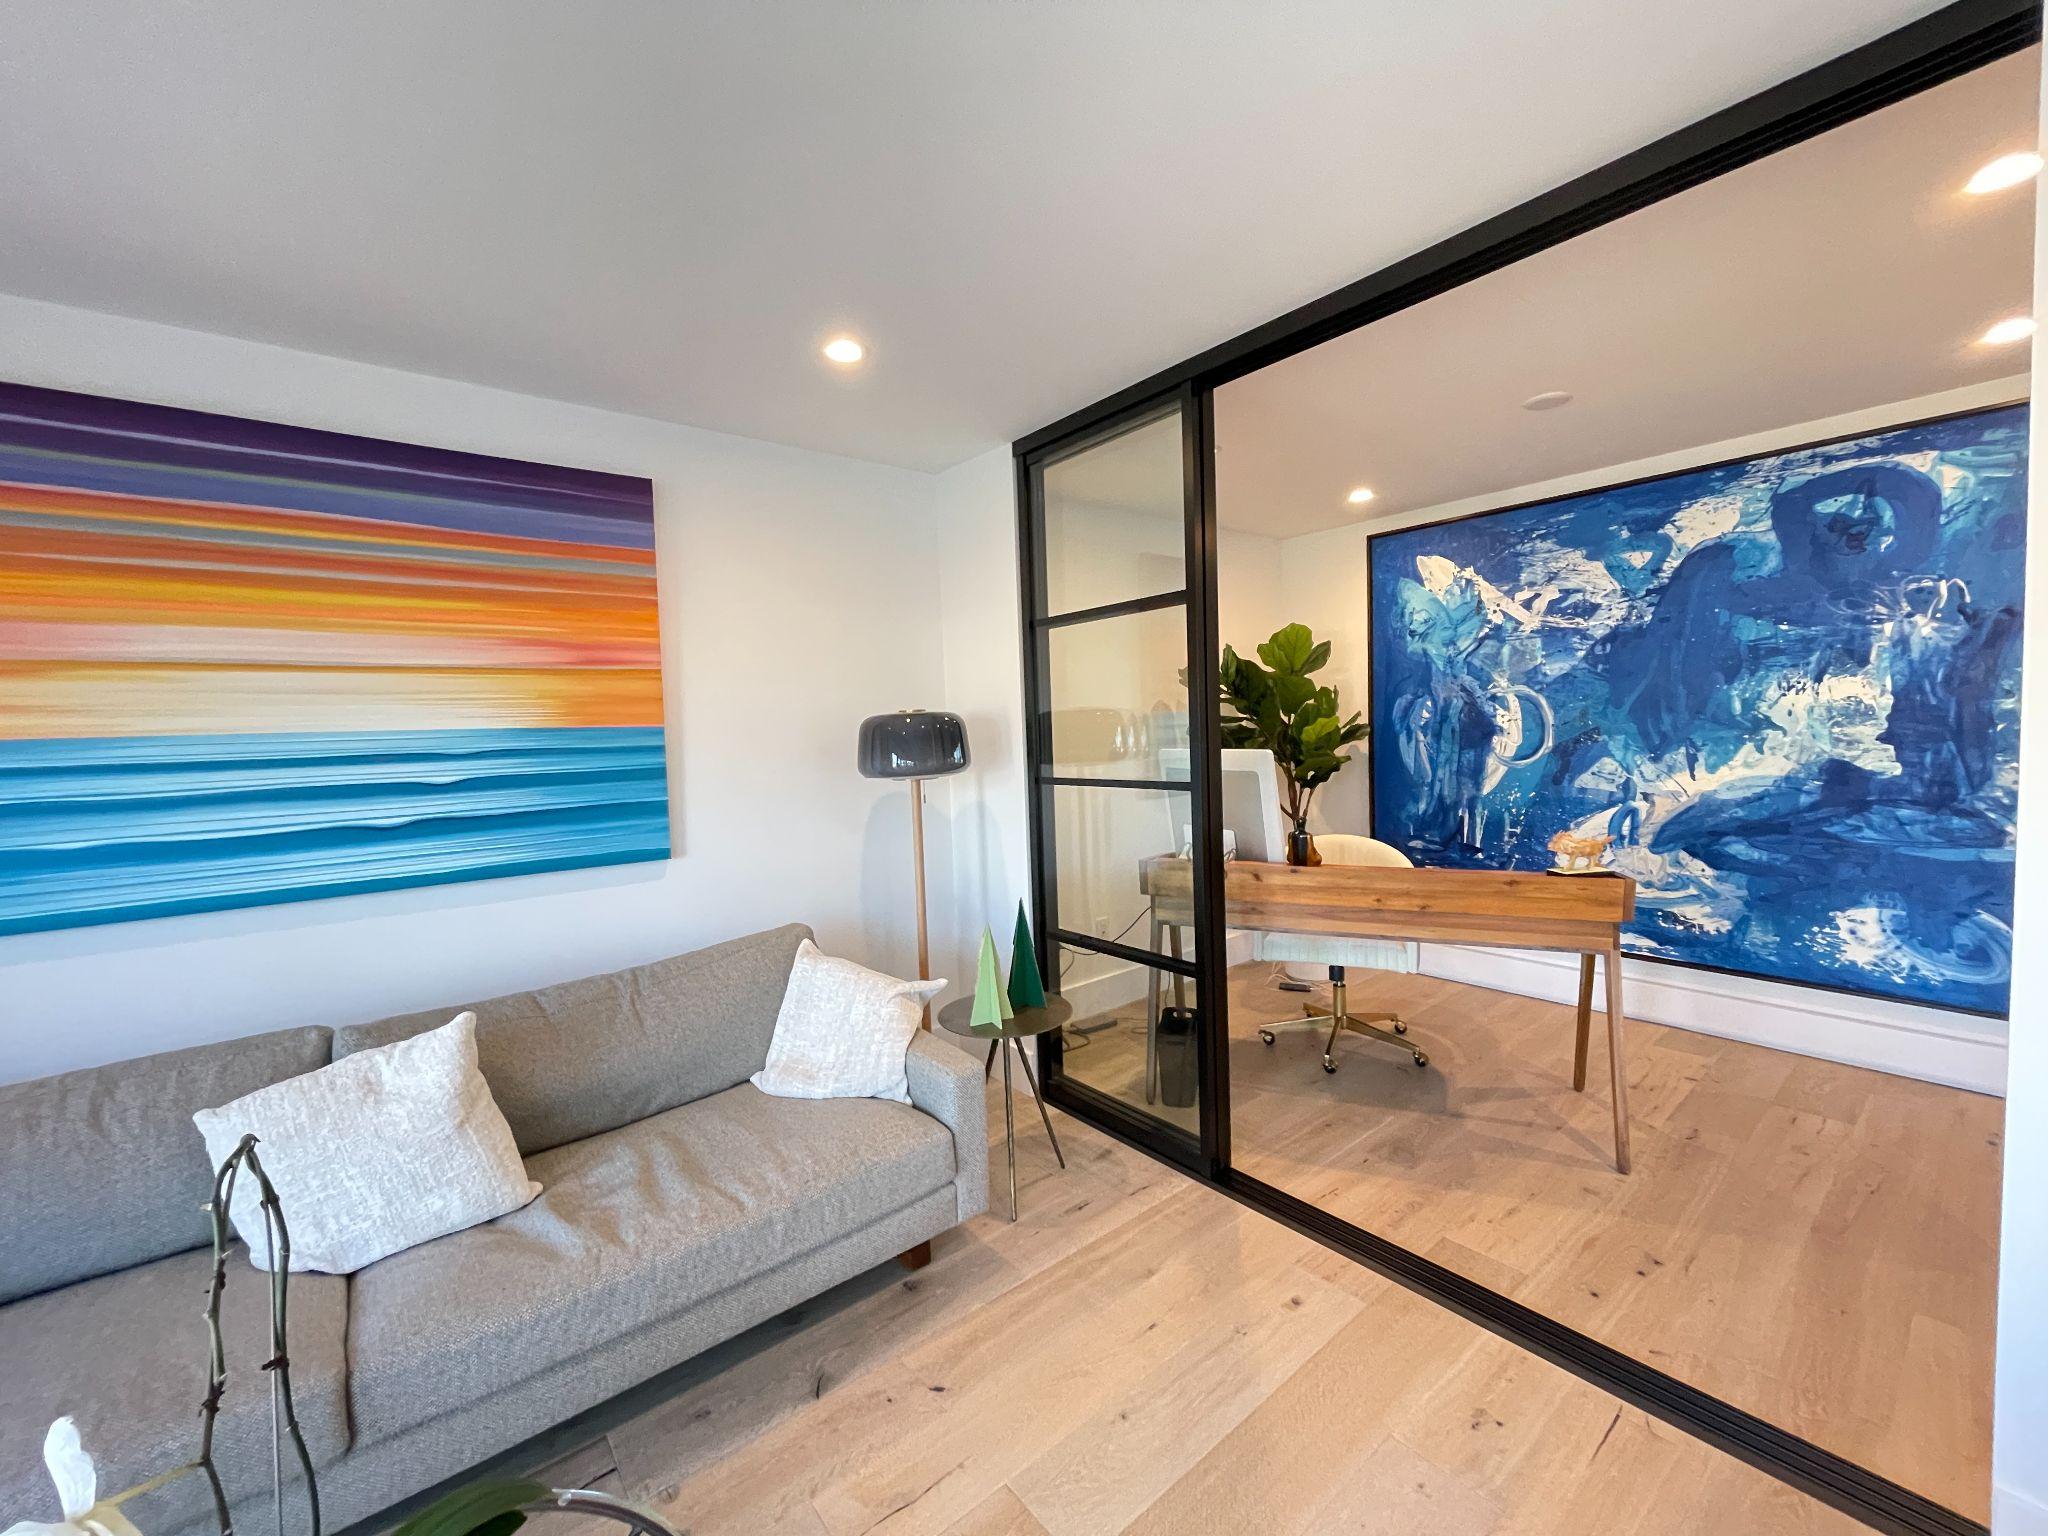 Interior sliding glass door separating an office from a living room with large artwork on the walls.